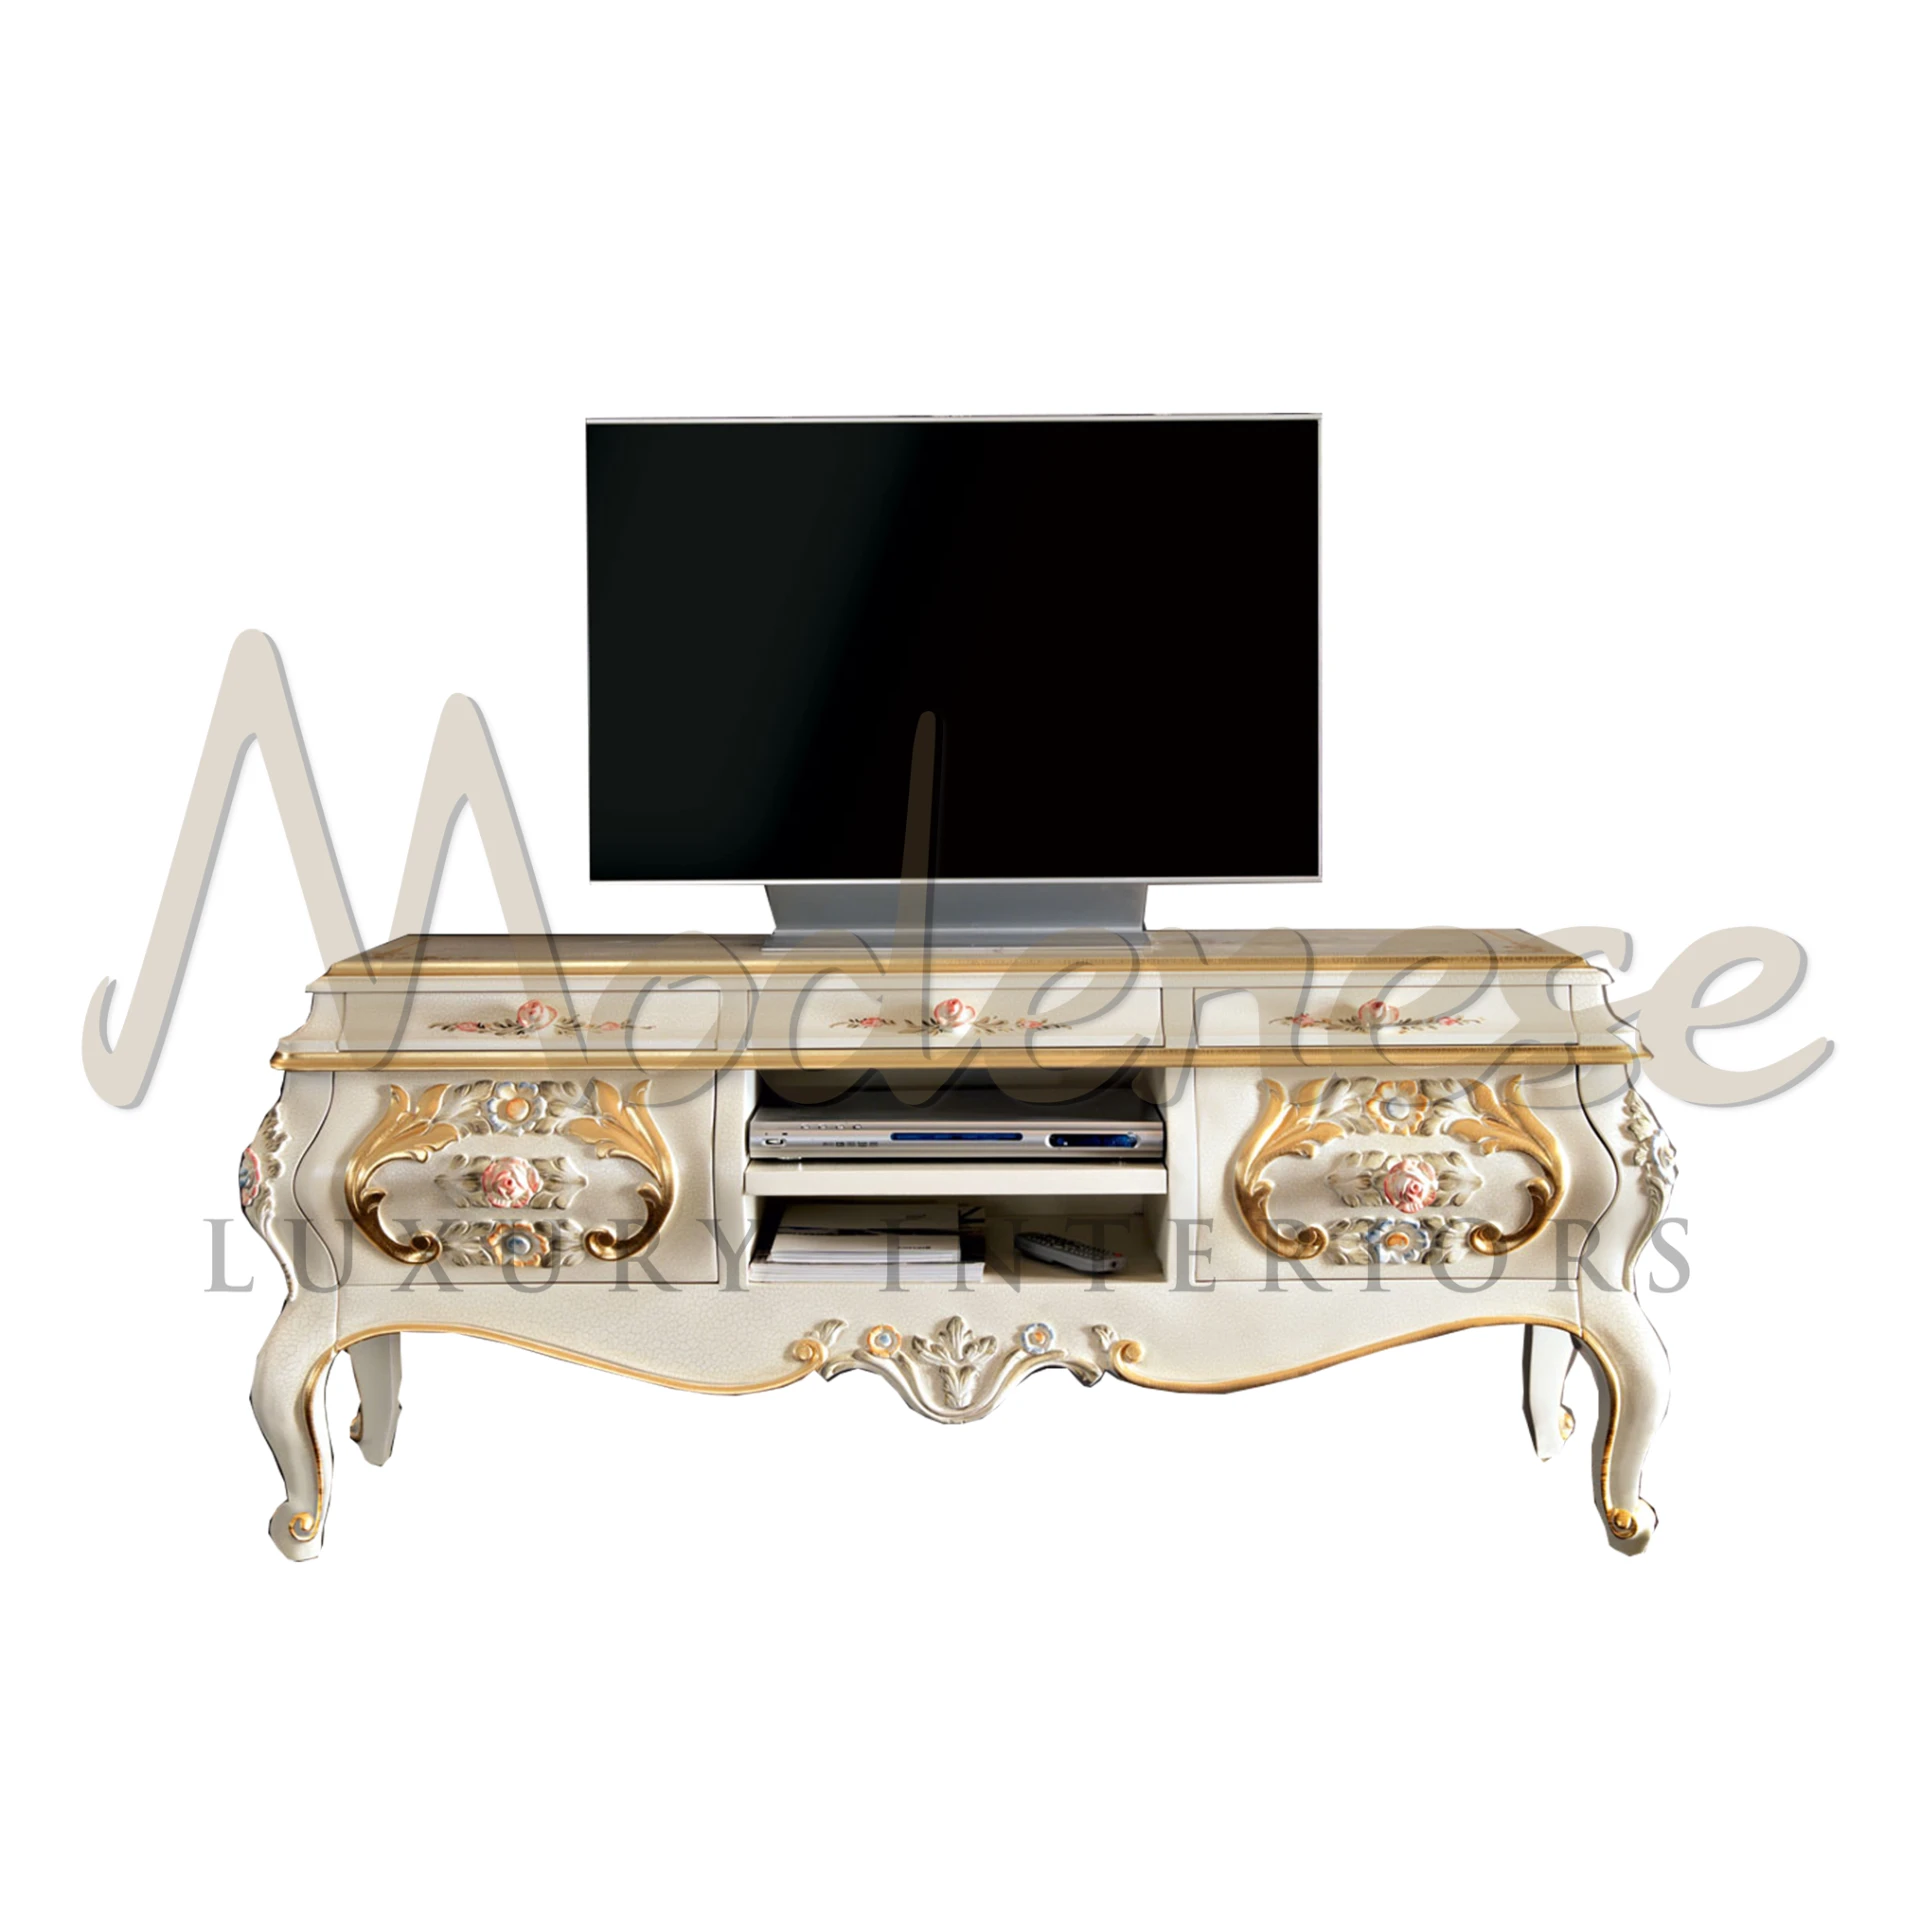 Traditional Handmade Wood TV Stand, premium quality with classic carvings, embodying luxury and durability in design.
